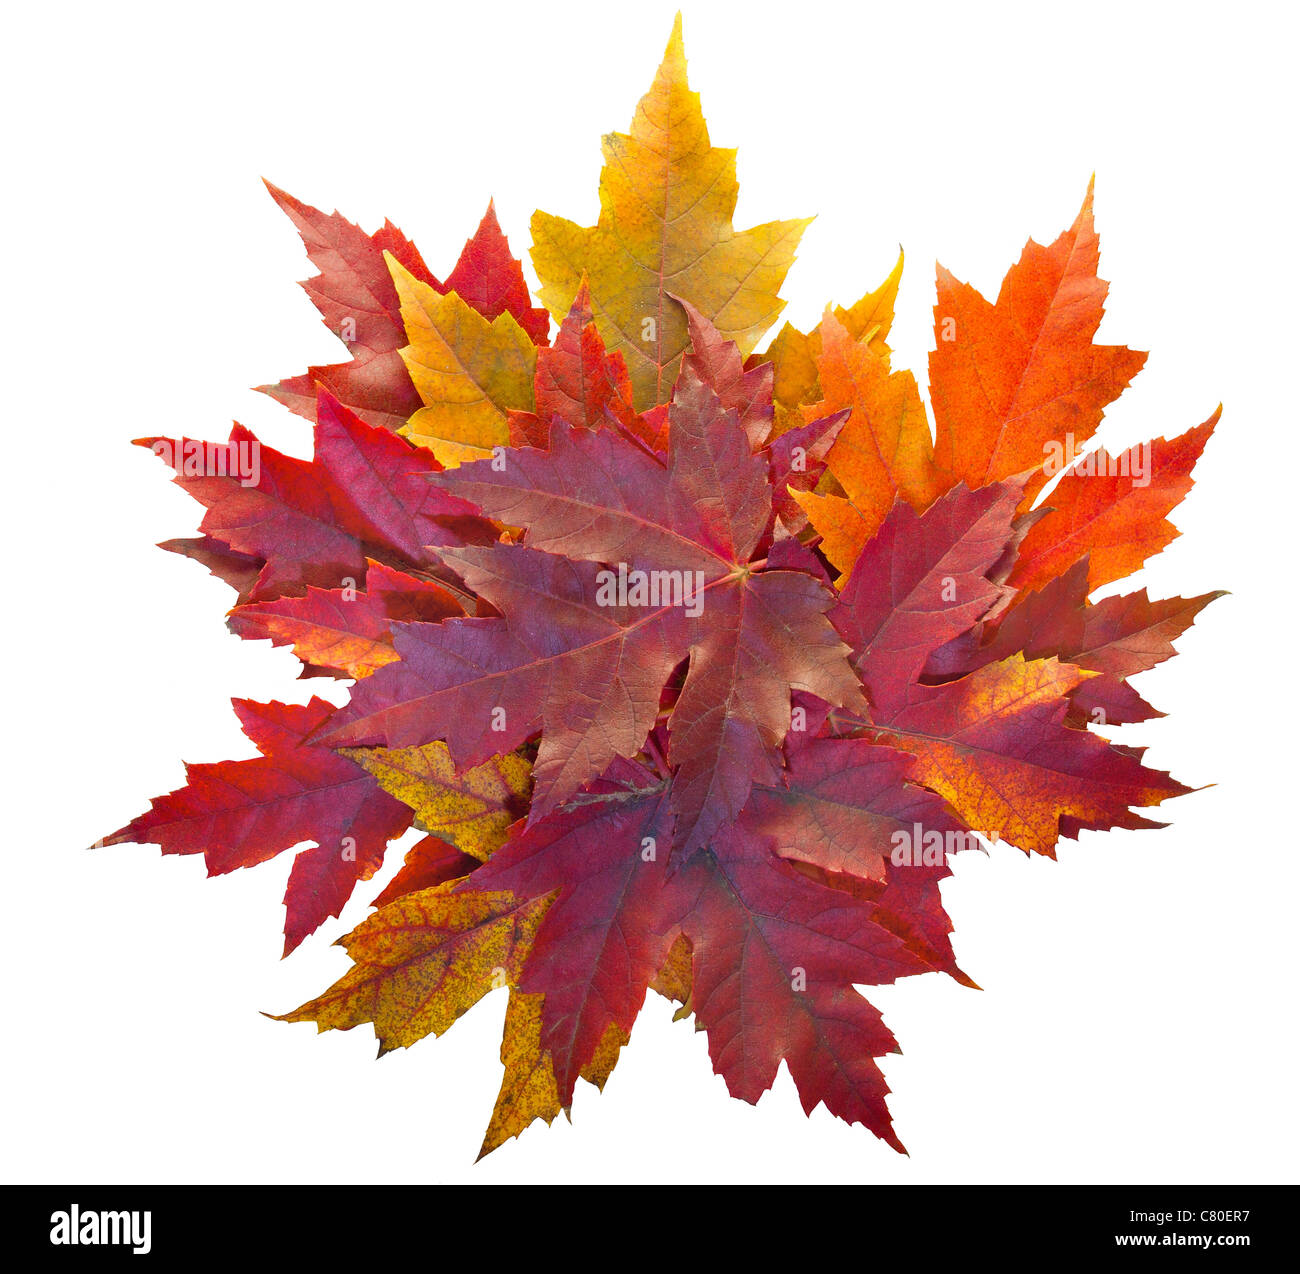 Fall Season Maple Tree Pile of Leaves Isolated on White Background Stock Photo